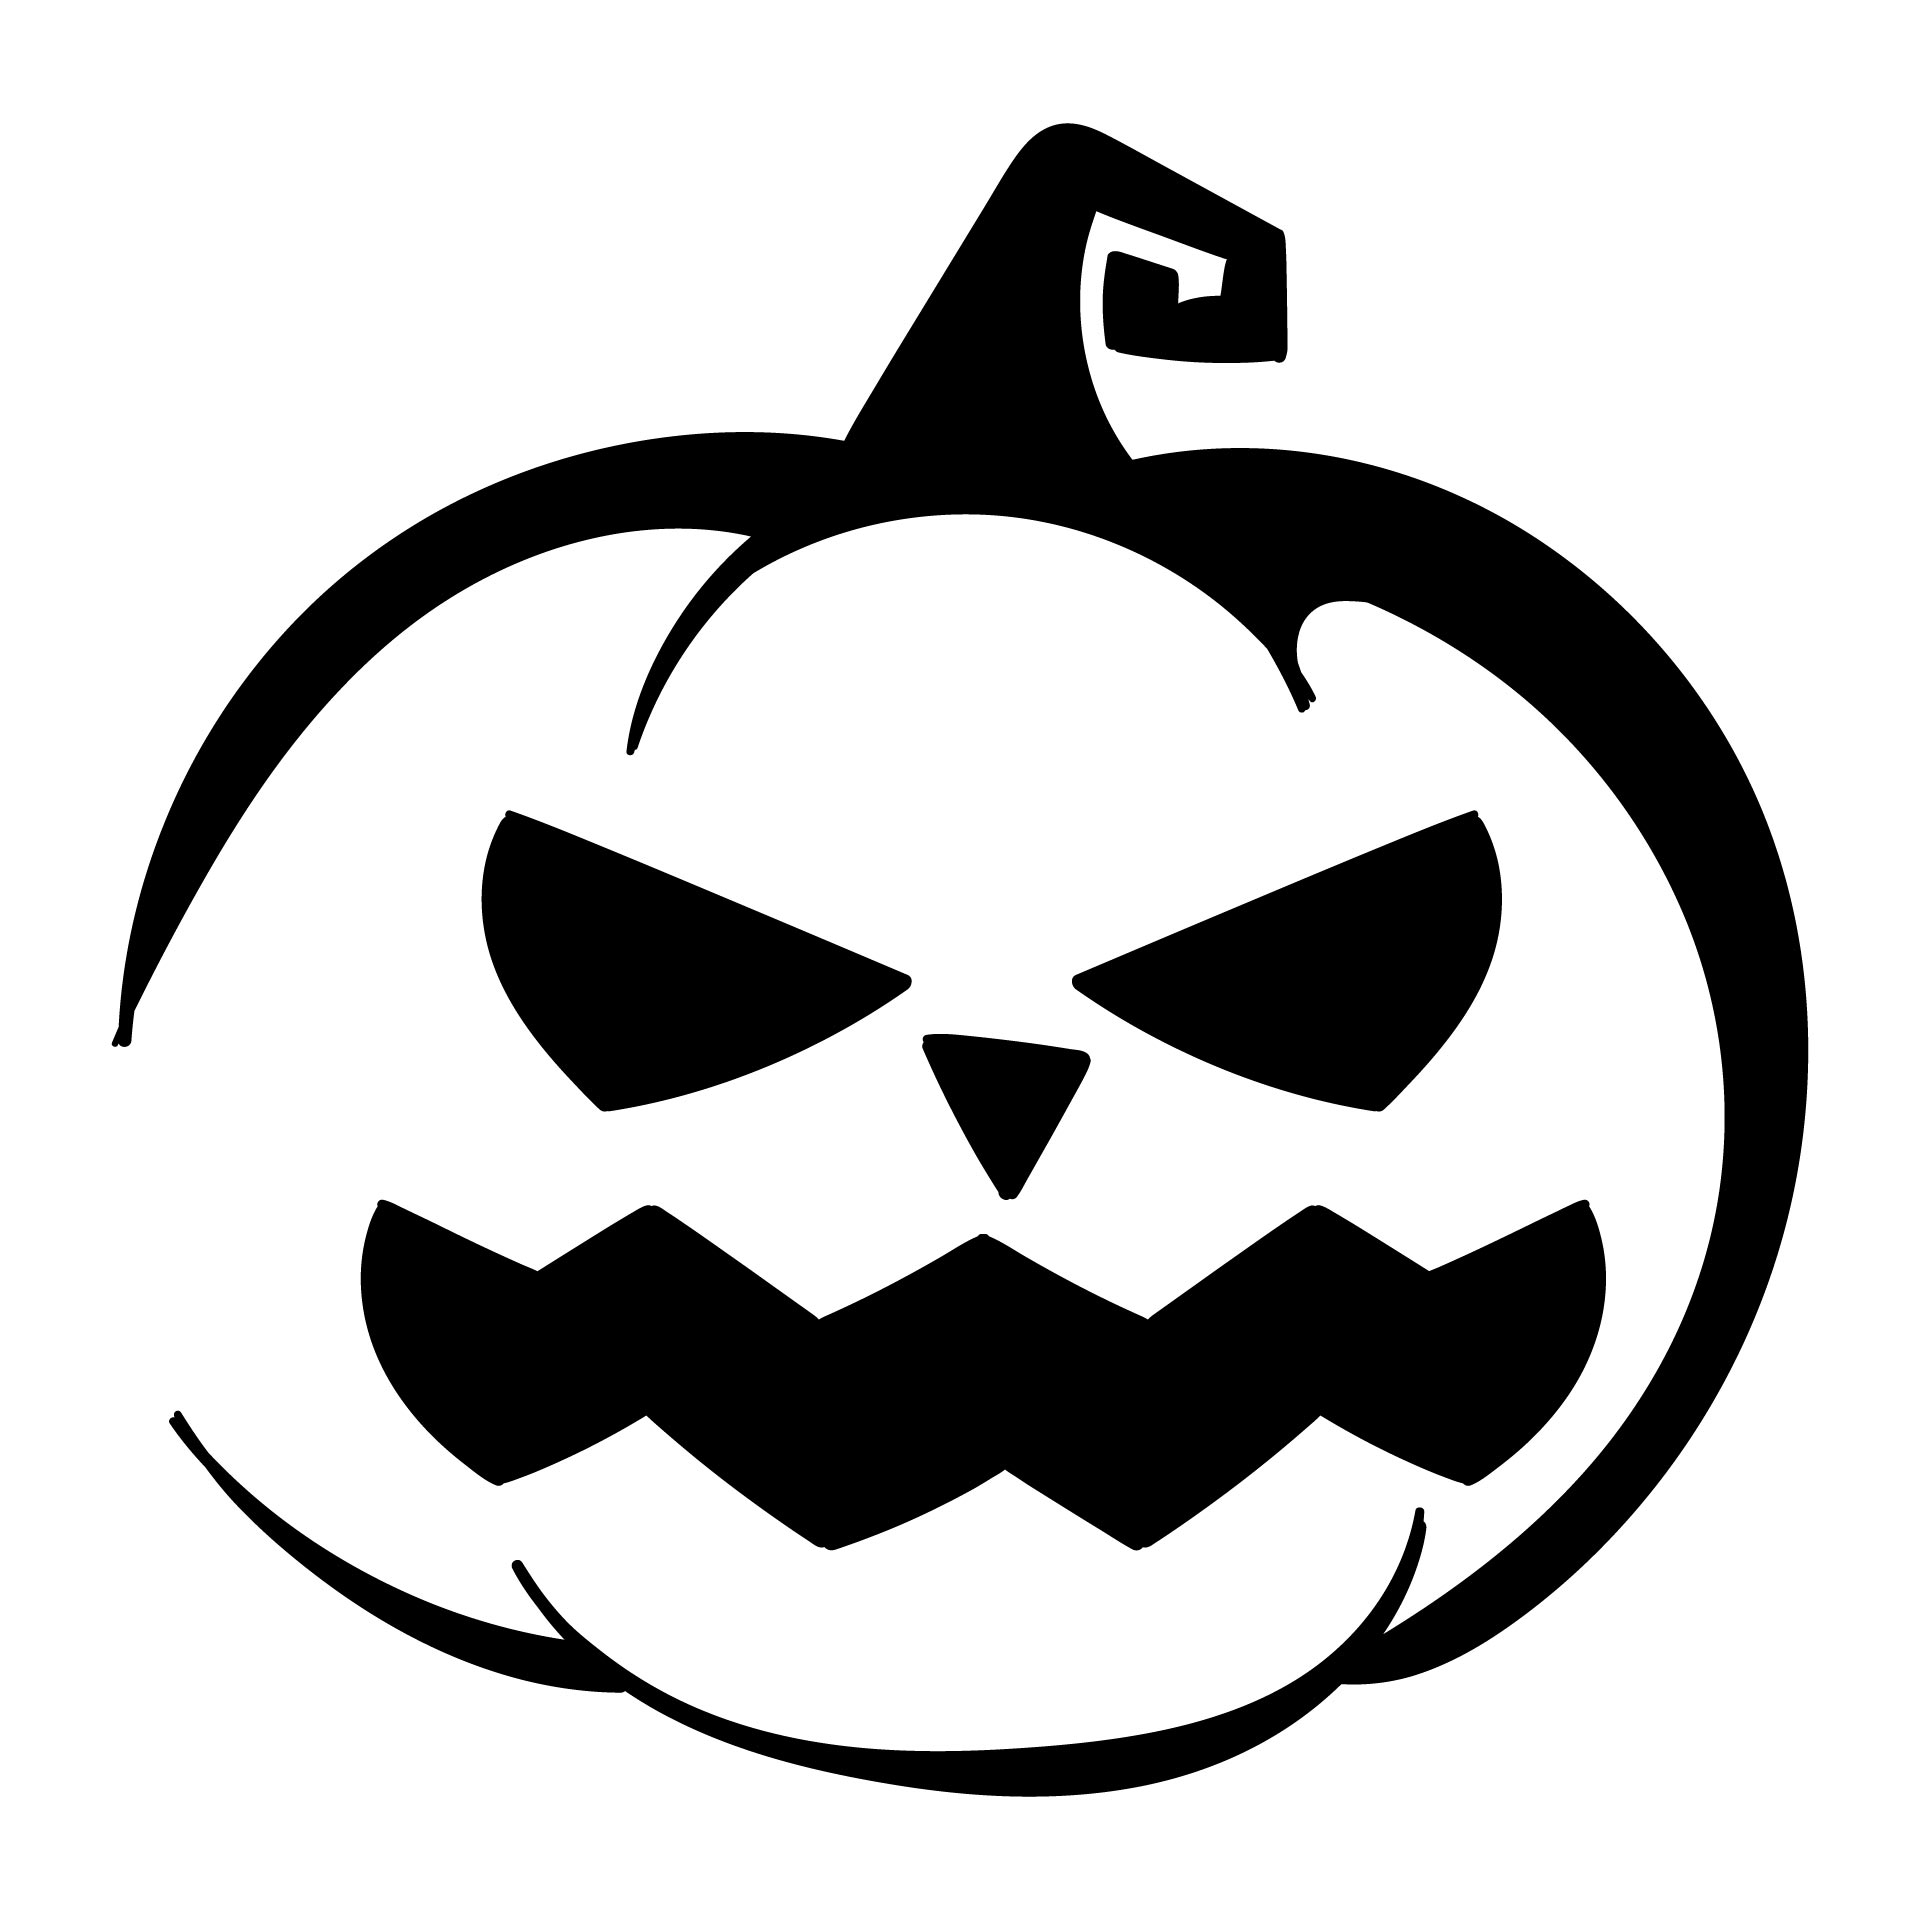 printable-halloween-pumpkin-faces-find-pumpkin-face-stock-images-in-hd